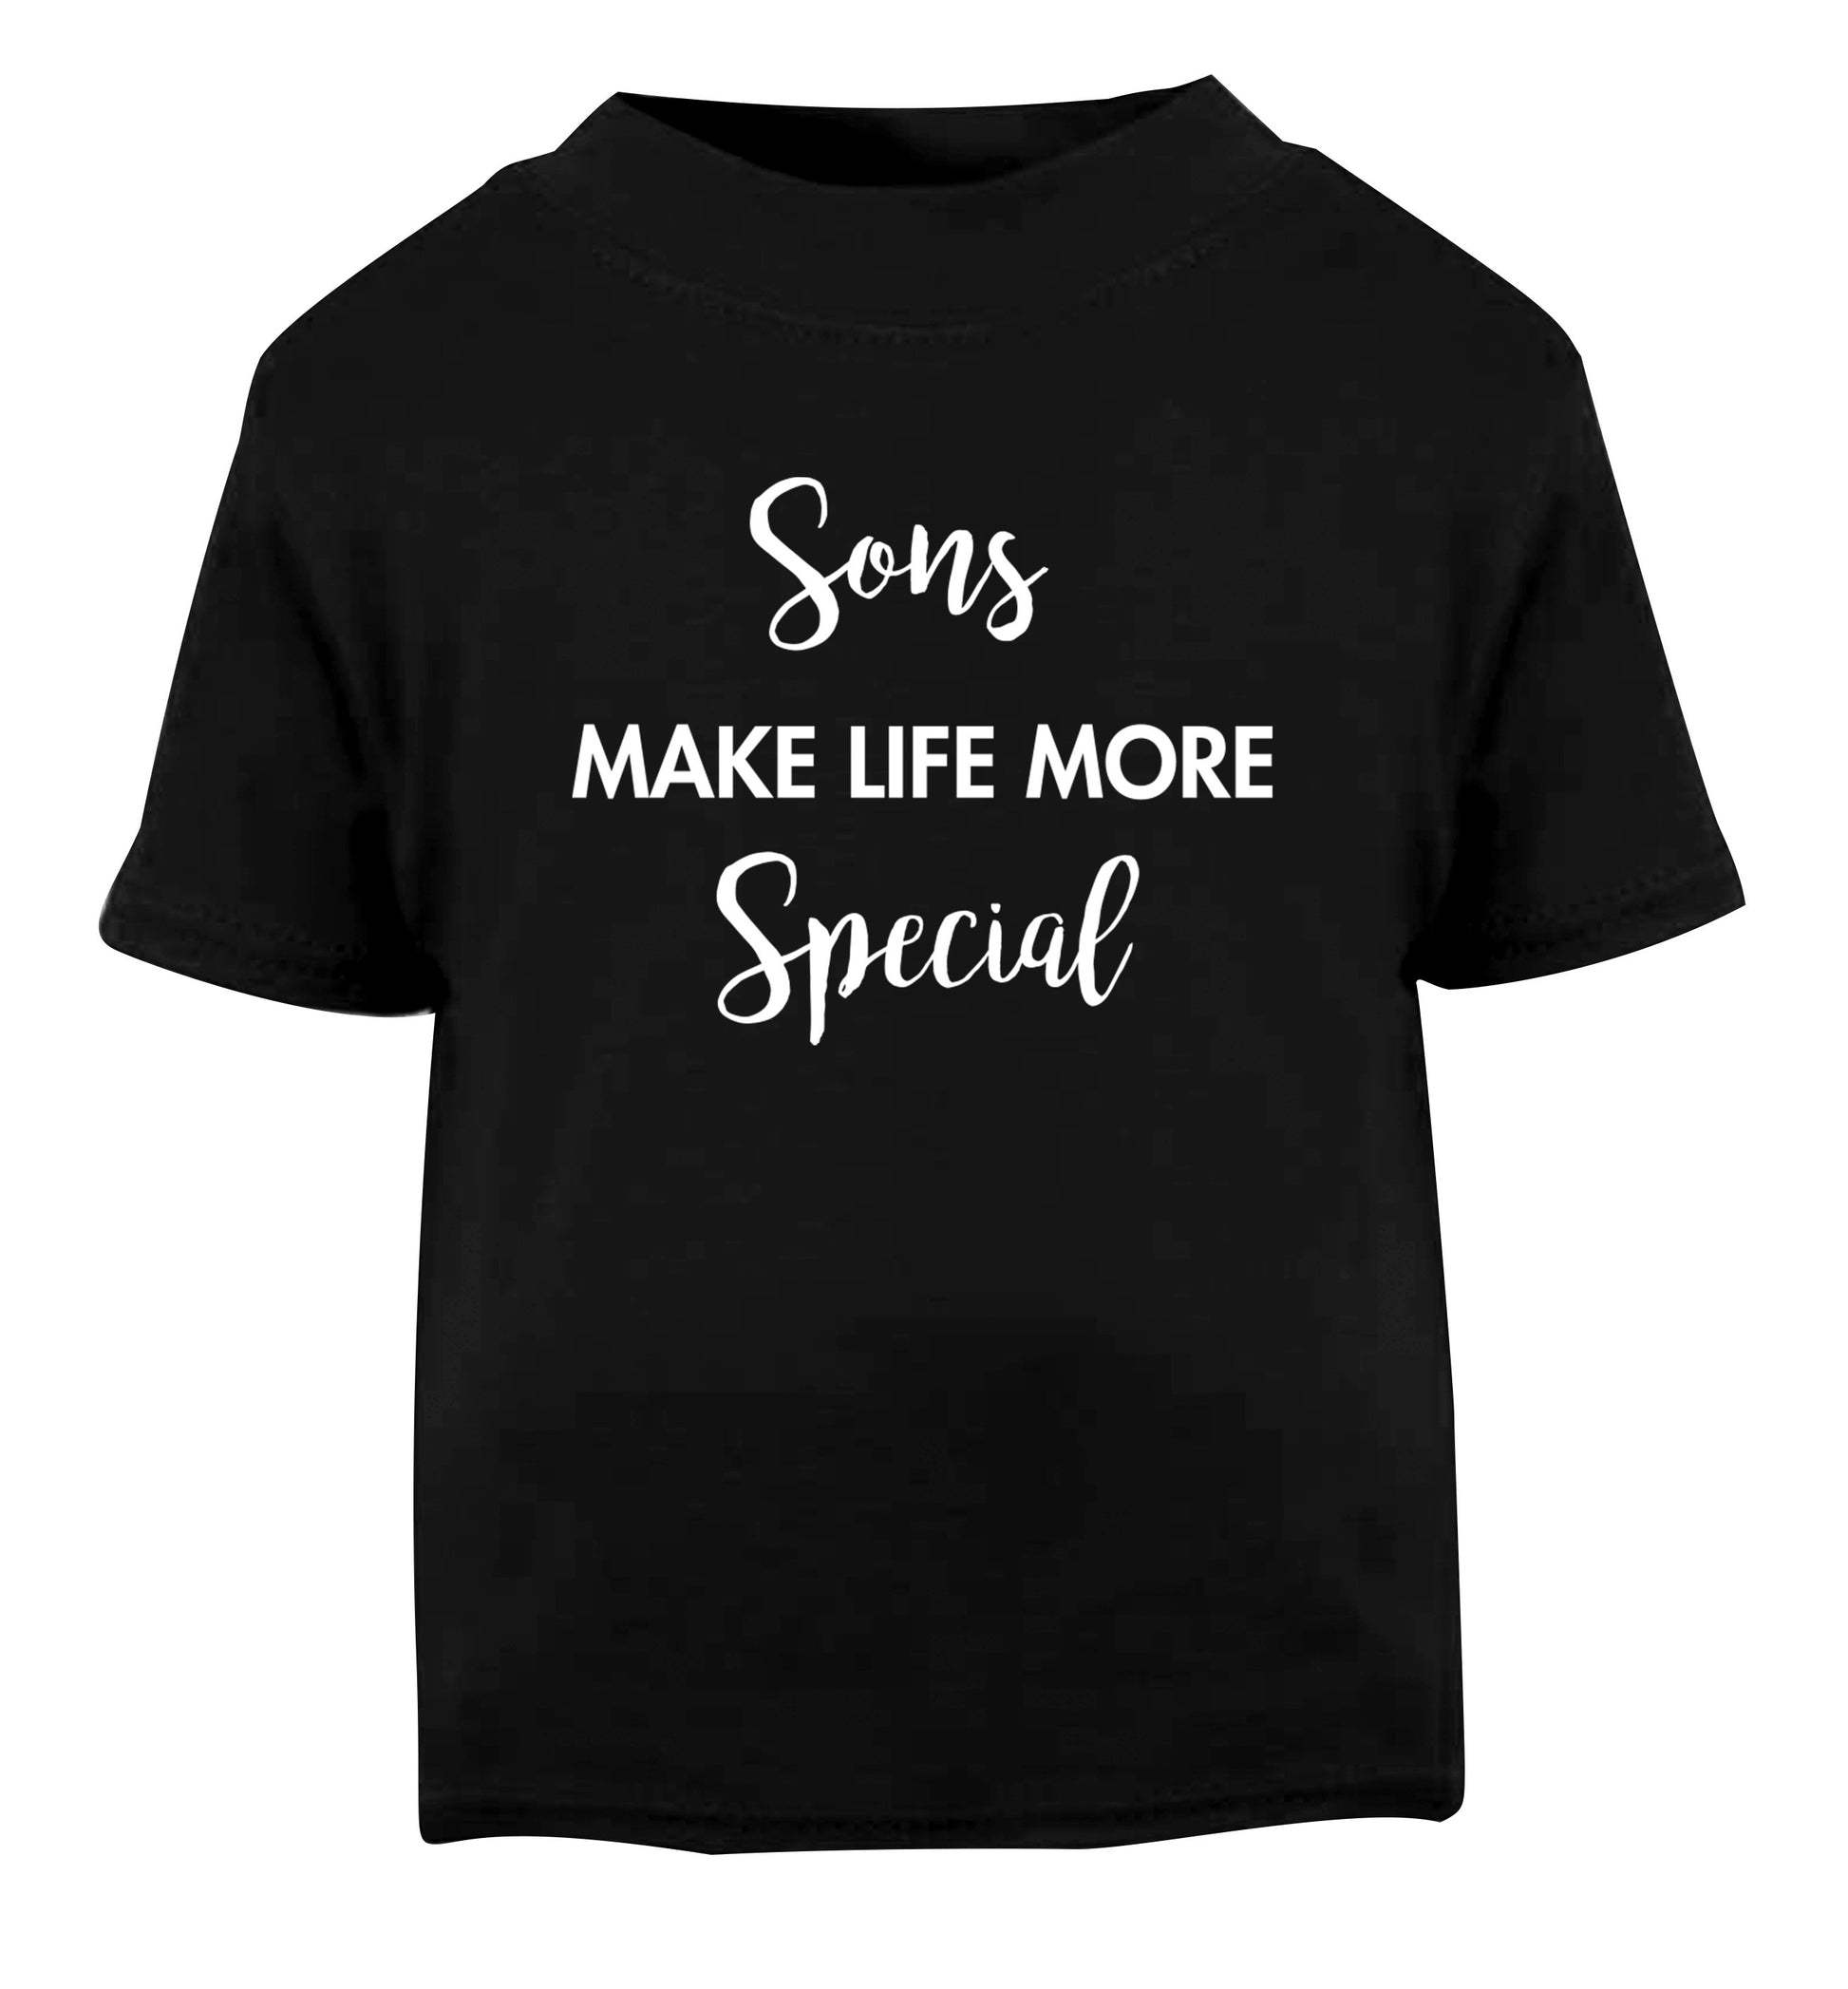 Daughters make life more special Black Baby Toddler Tshirt 2 years